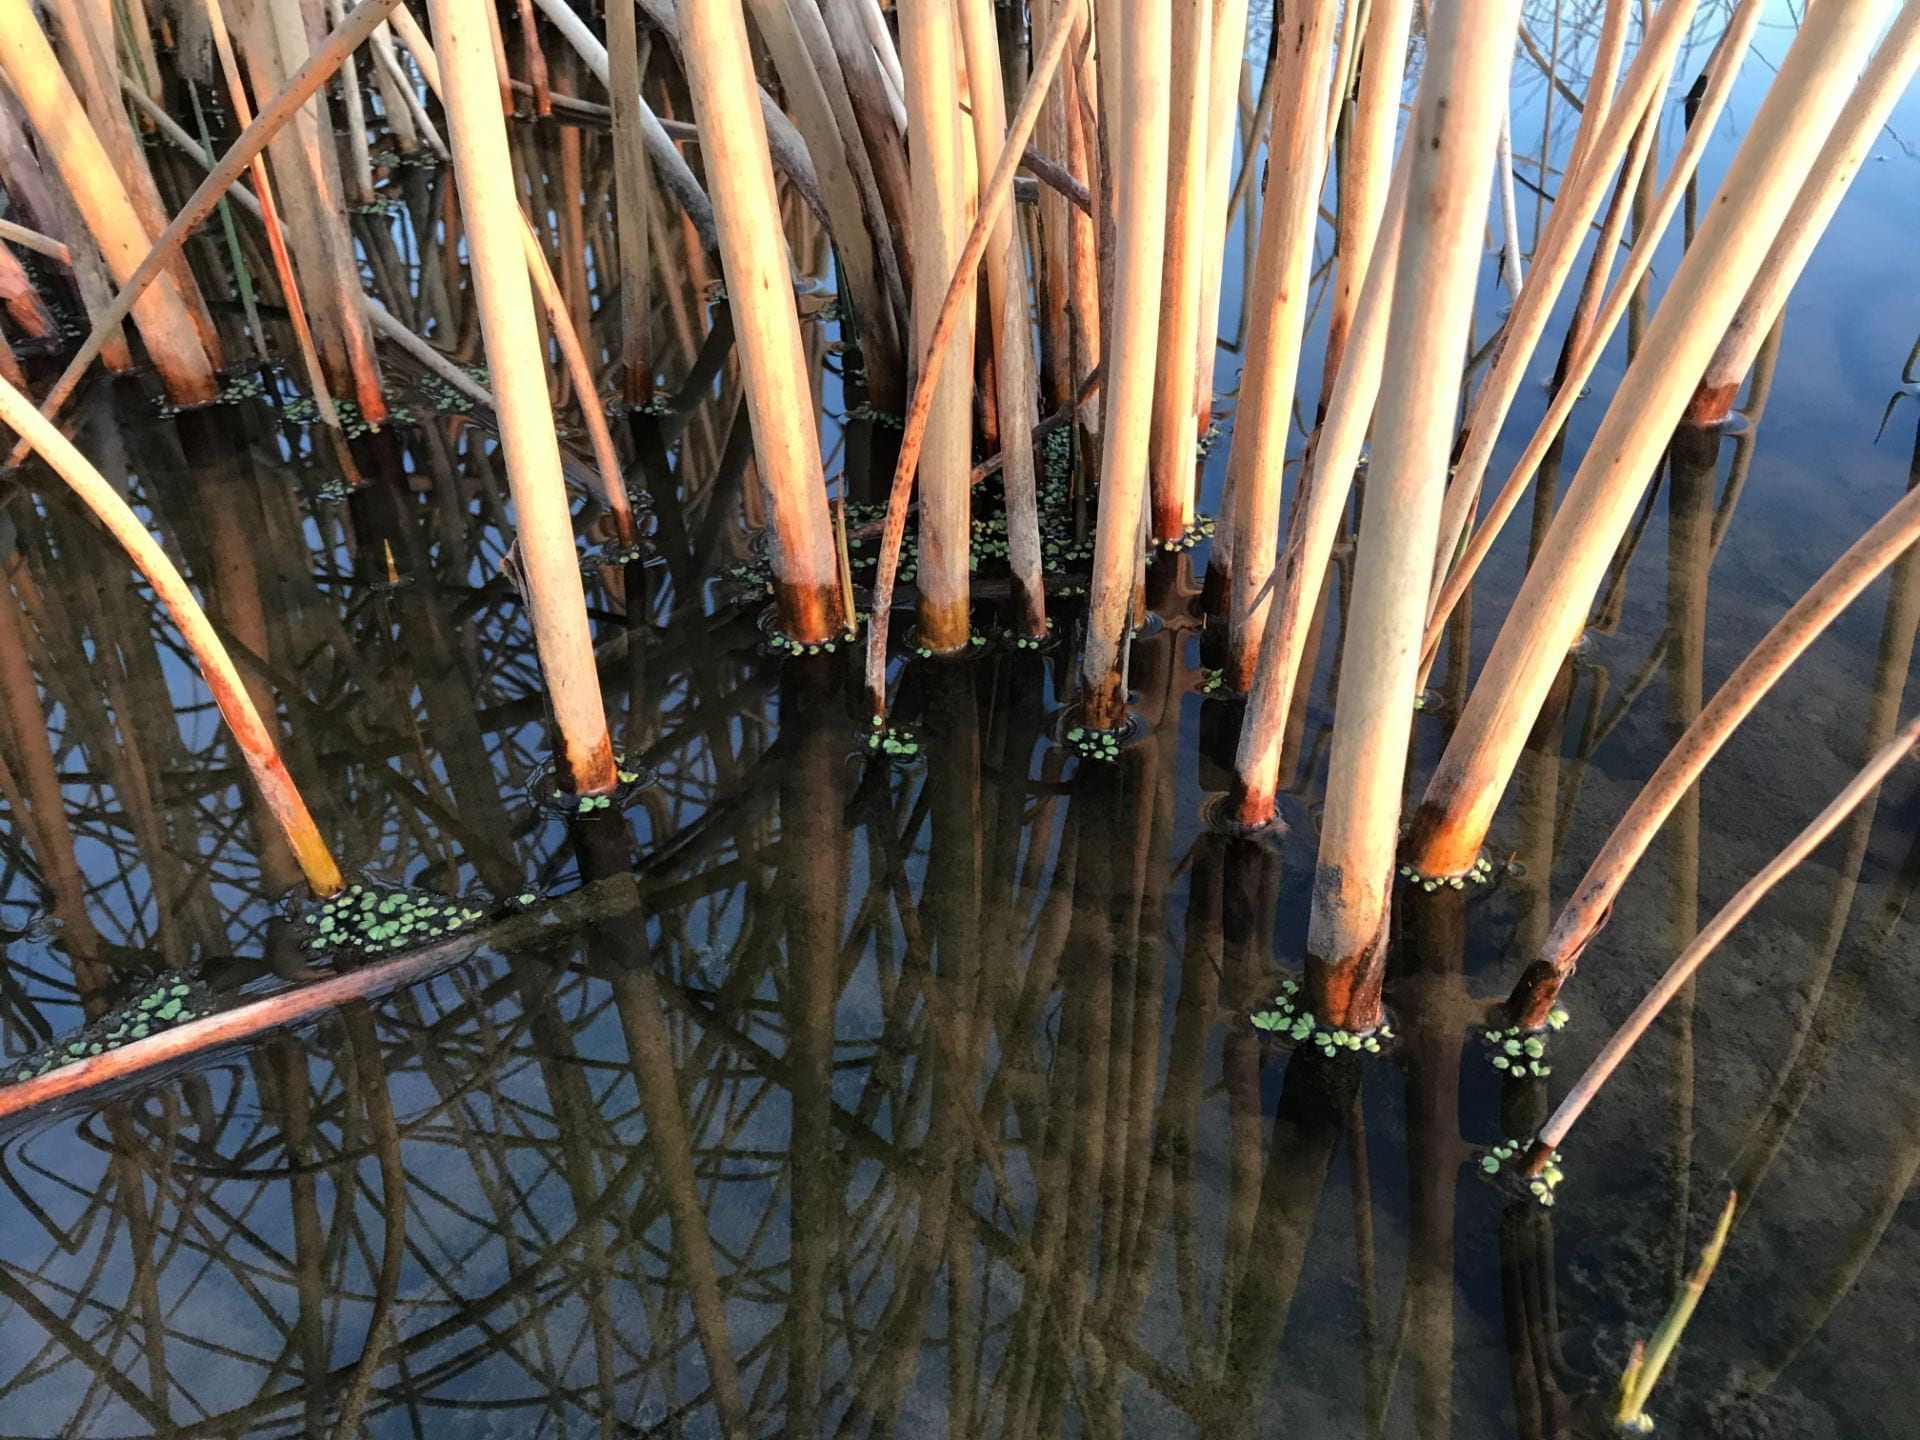 reeds reflected in water